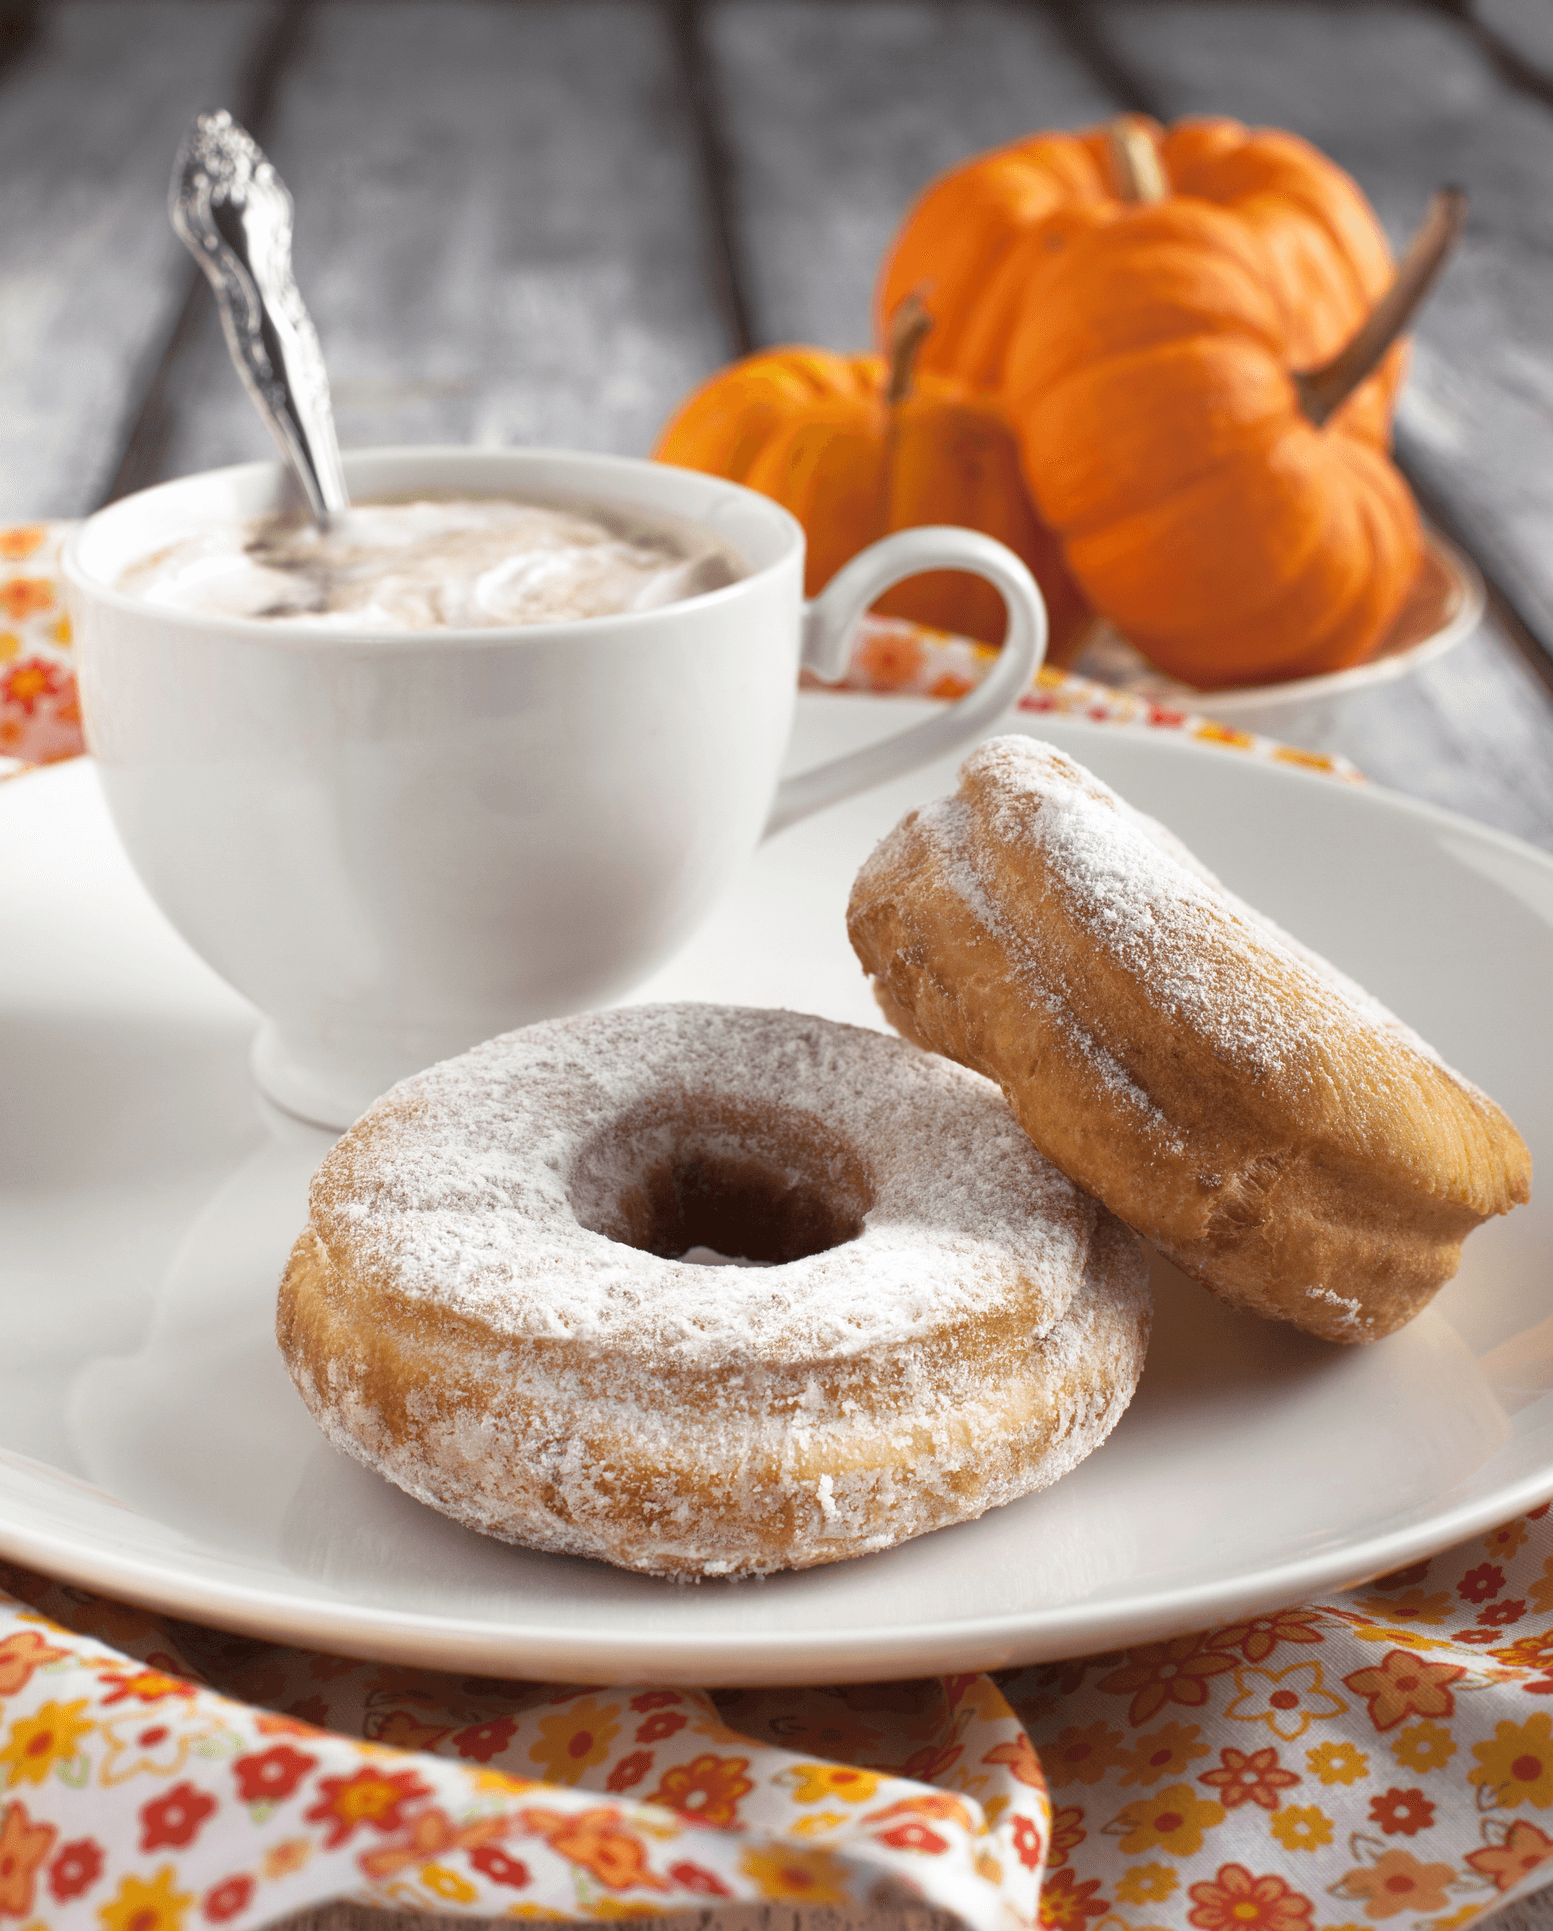 dreamstime_m_35055380pumpkin donut and coffee